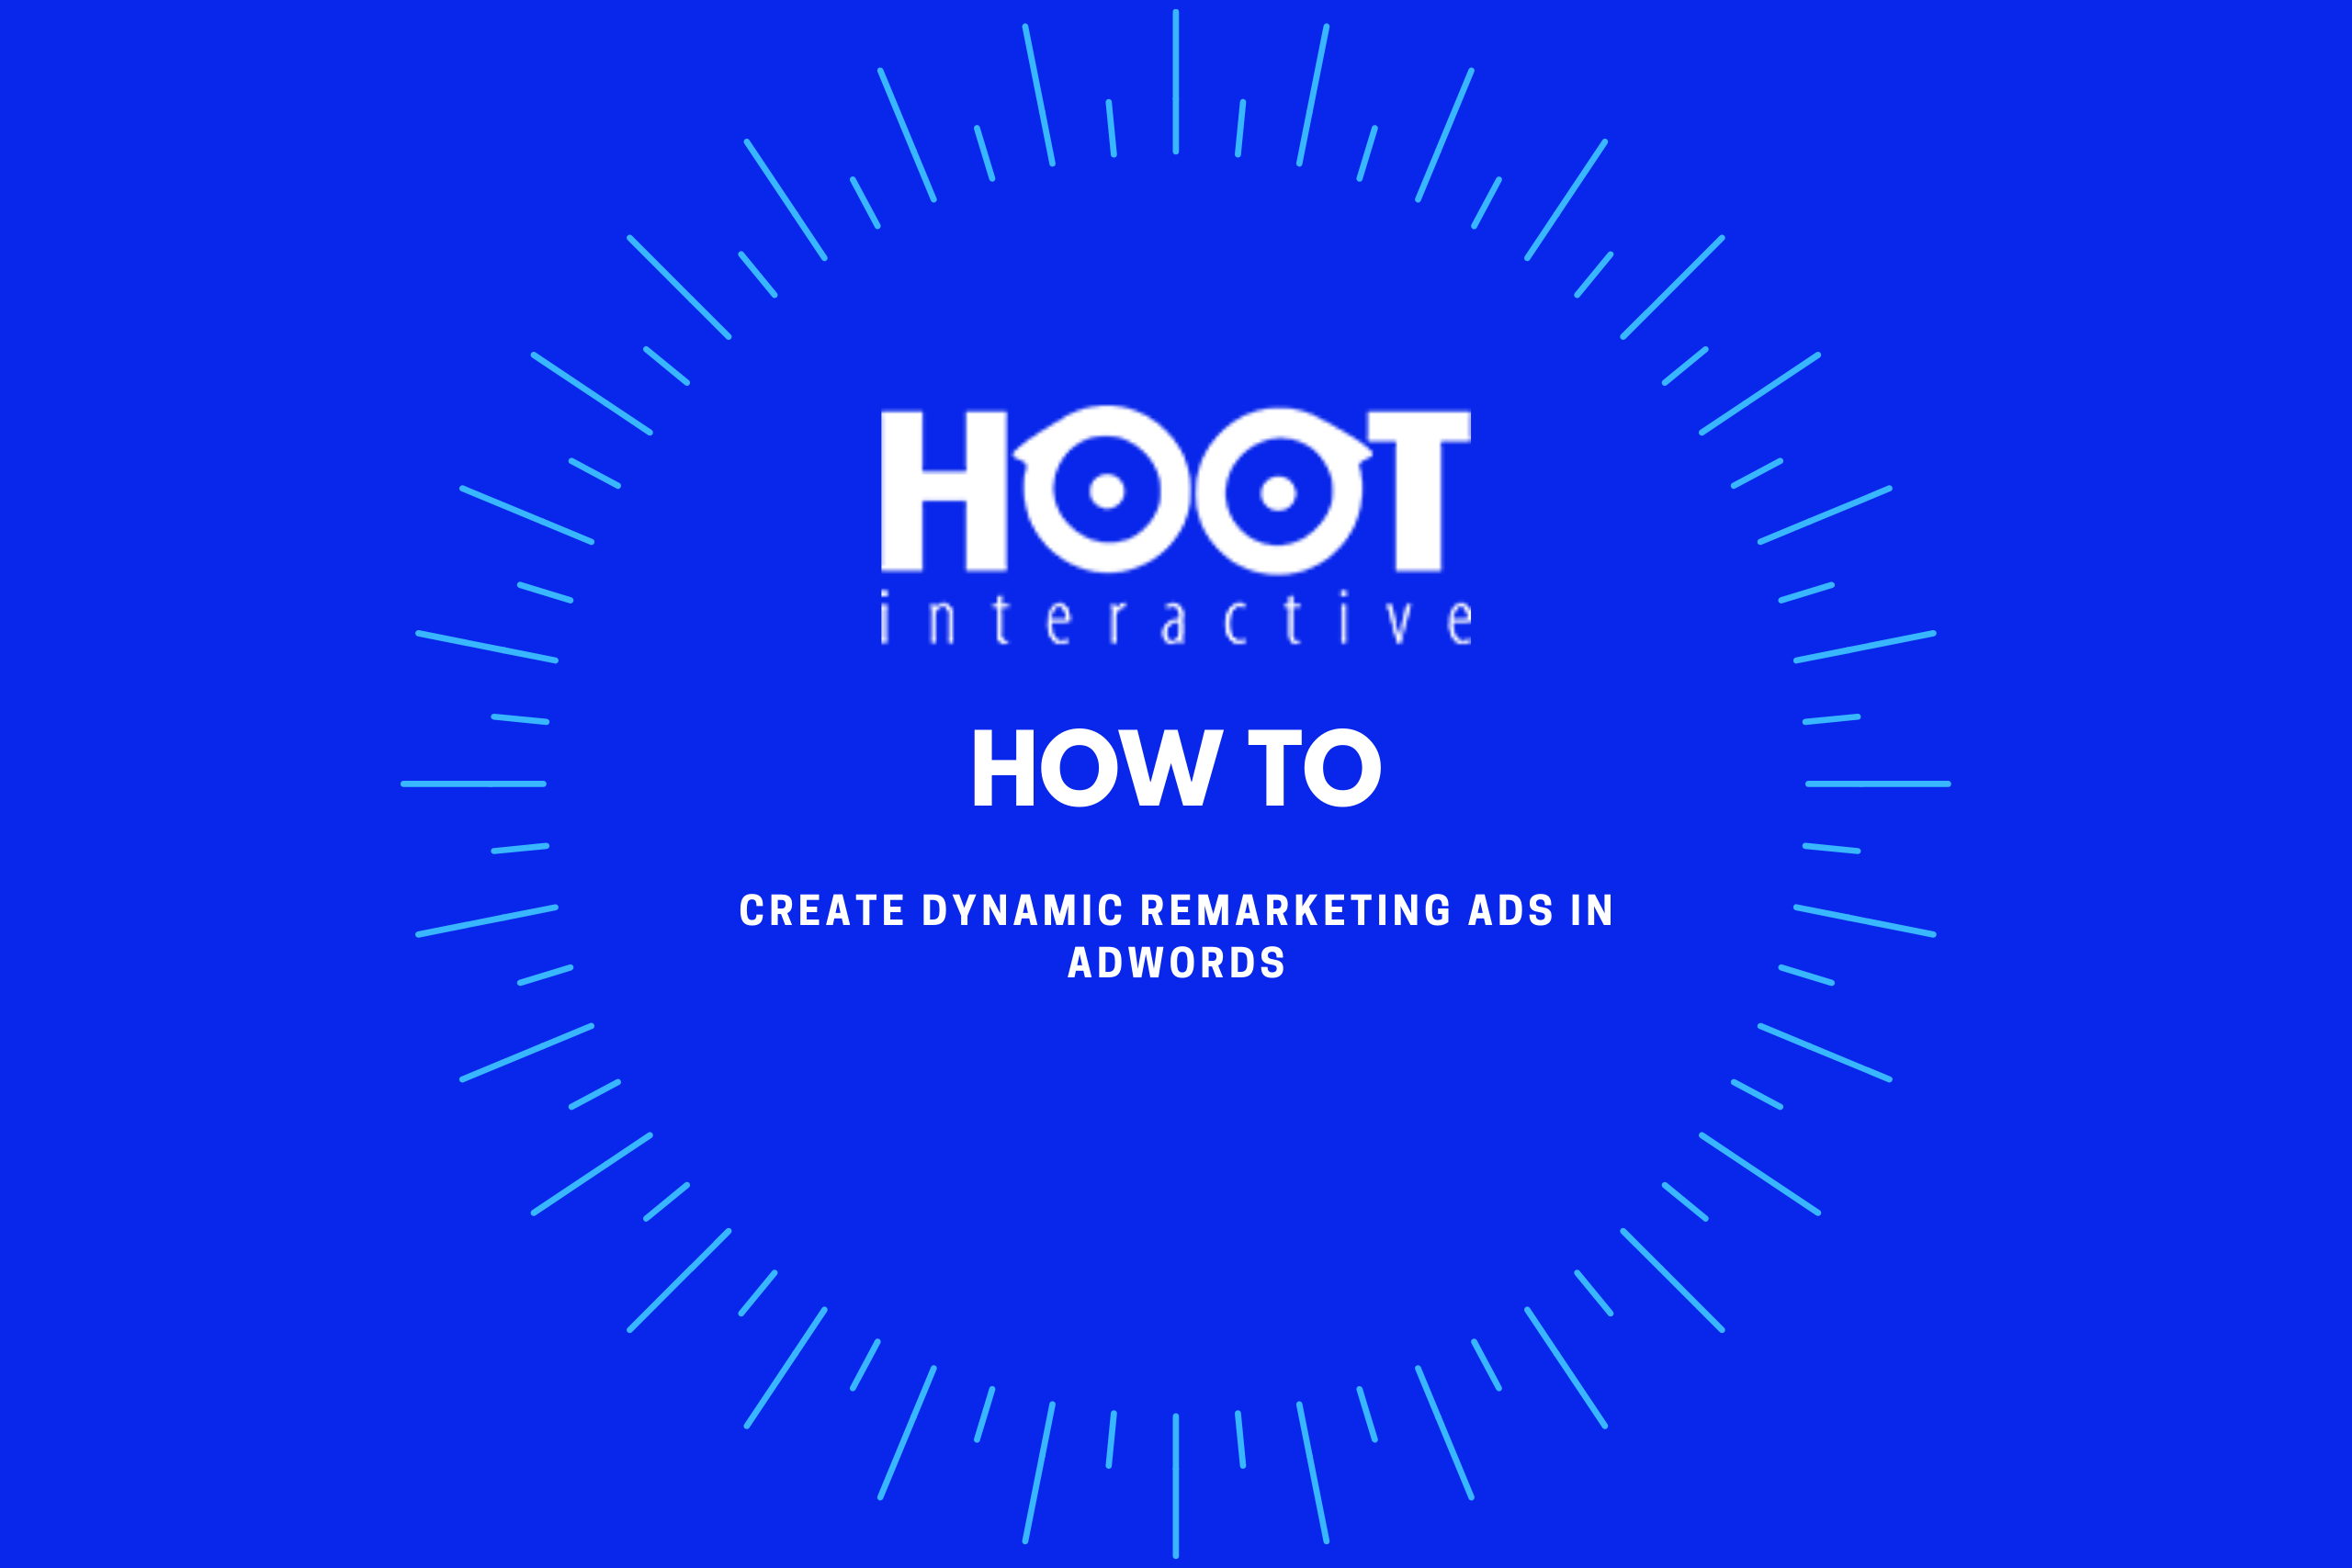 Hoot How To - Remarketing Ads in Adwords